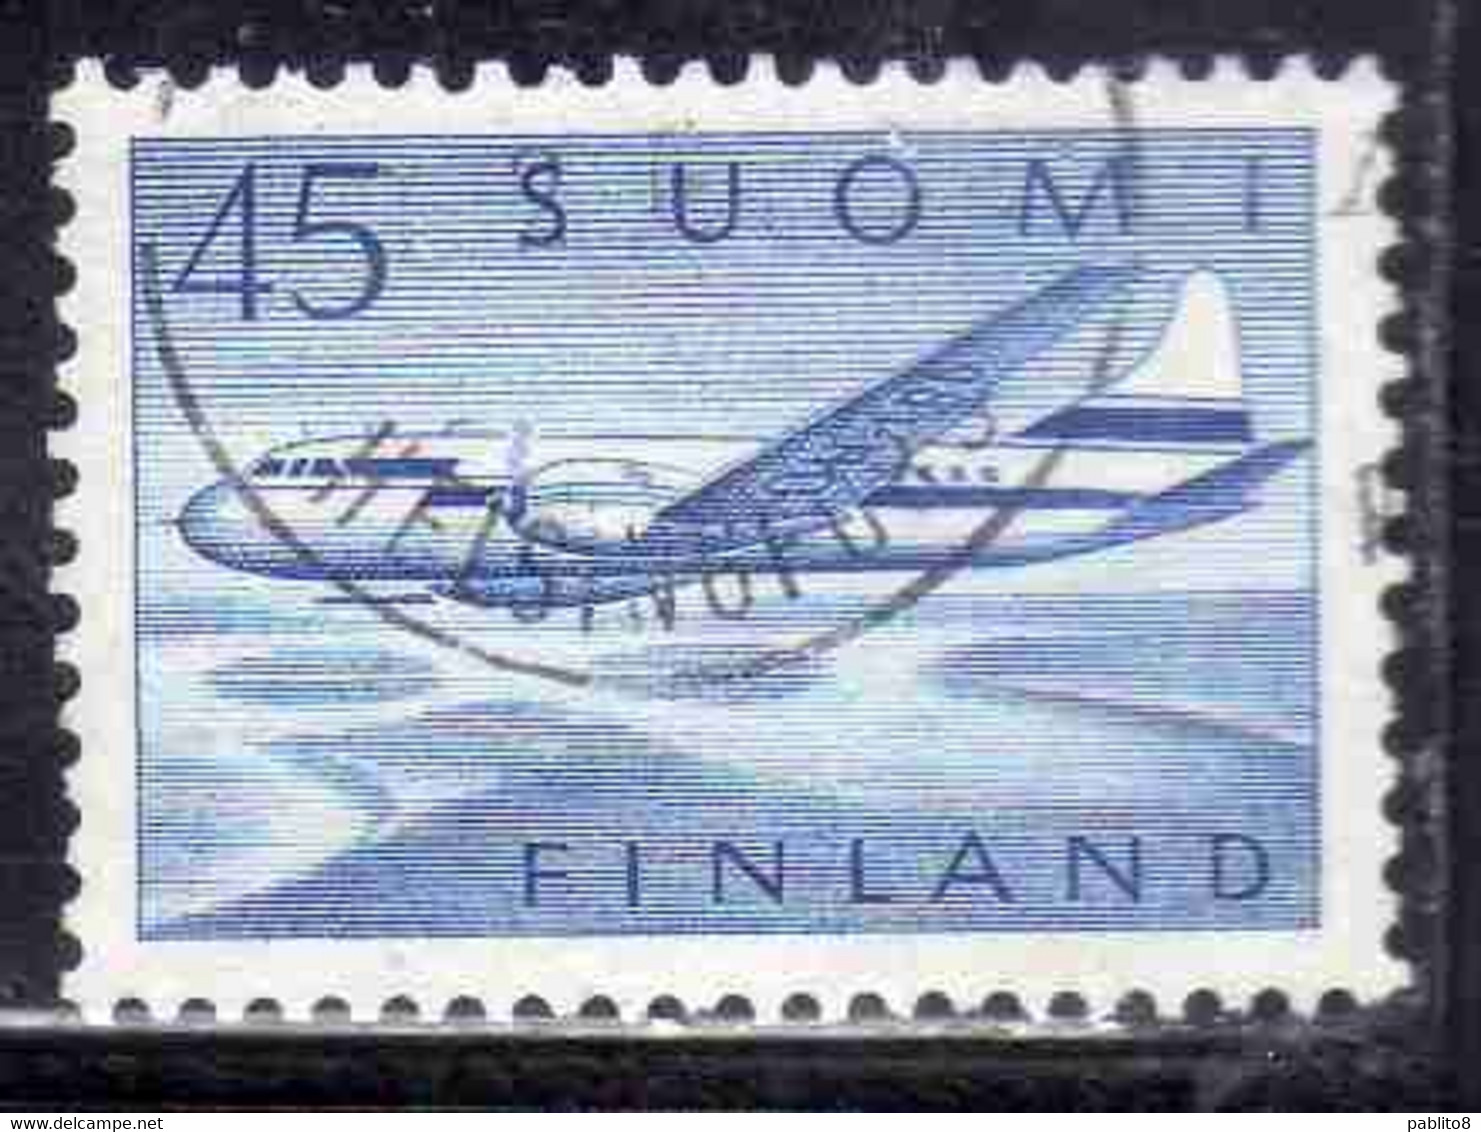 SUOMI FINLAND FINLANDIA FINLANDE 1958 AIR POST MAIL AIRMAIL CONVAIR OVER LAKES 34m USED USATO OBLITERE' - Used Stamps